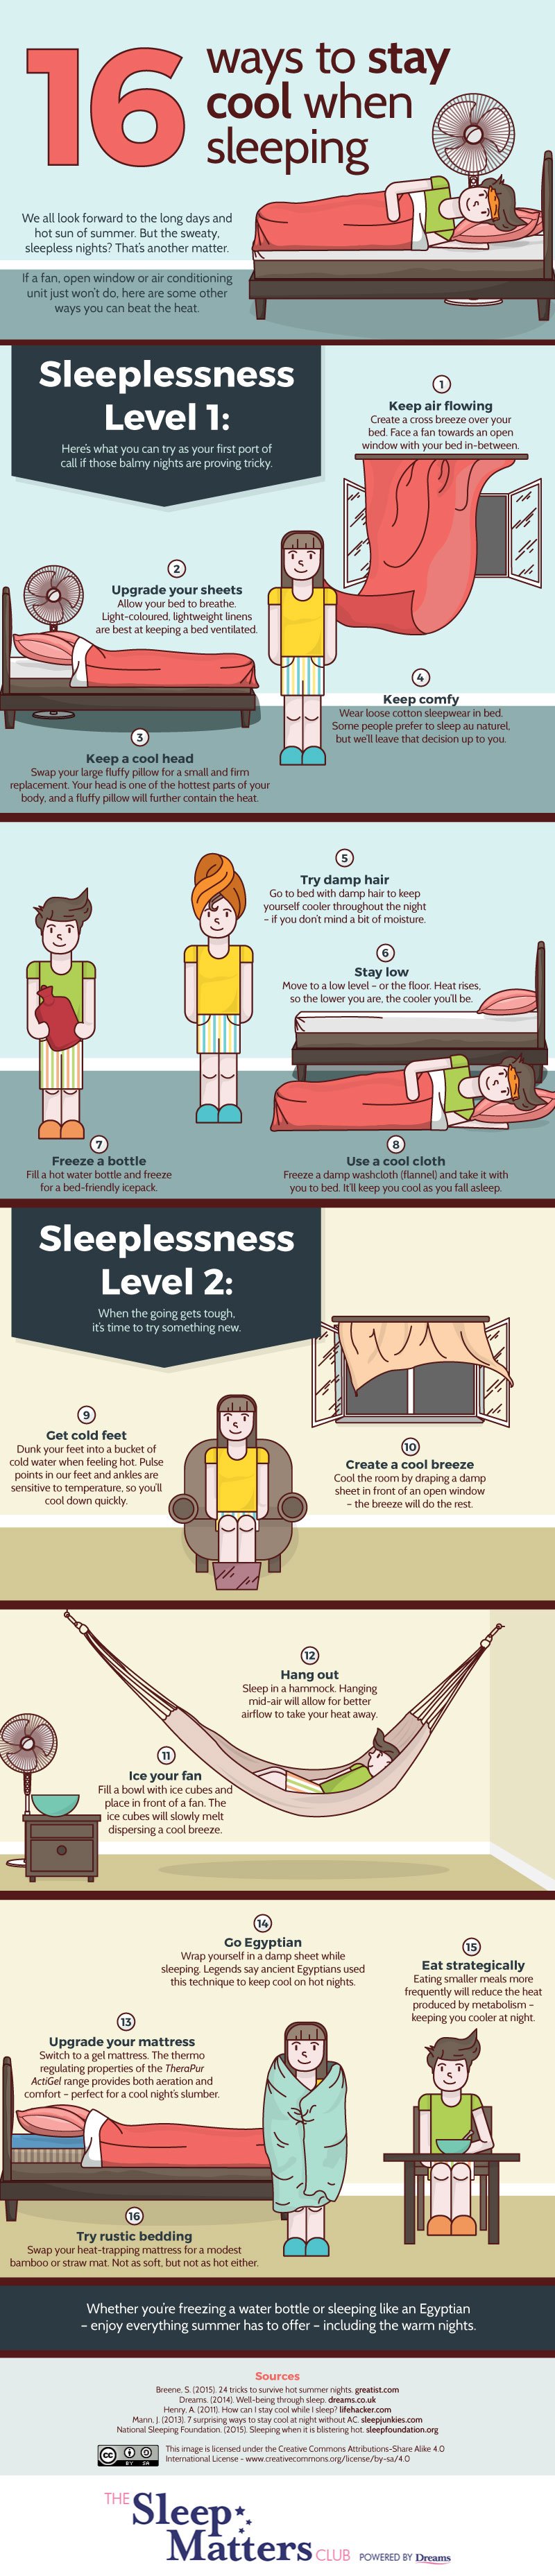 Here are 16 ways to stay cool at night. See this infographic and more at https://www.dreams.co.uk/sleep-matters-club